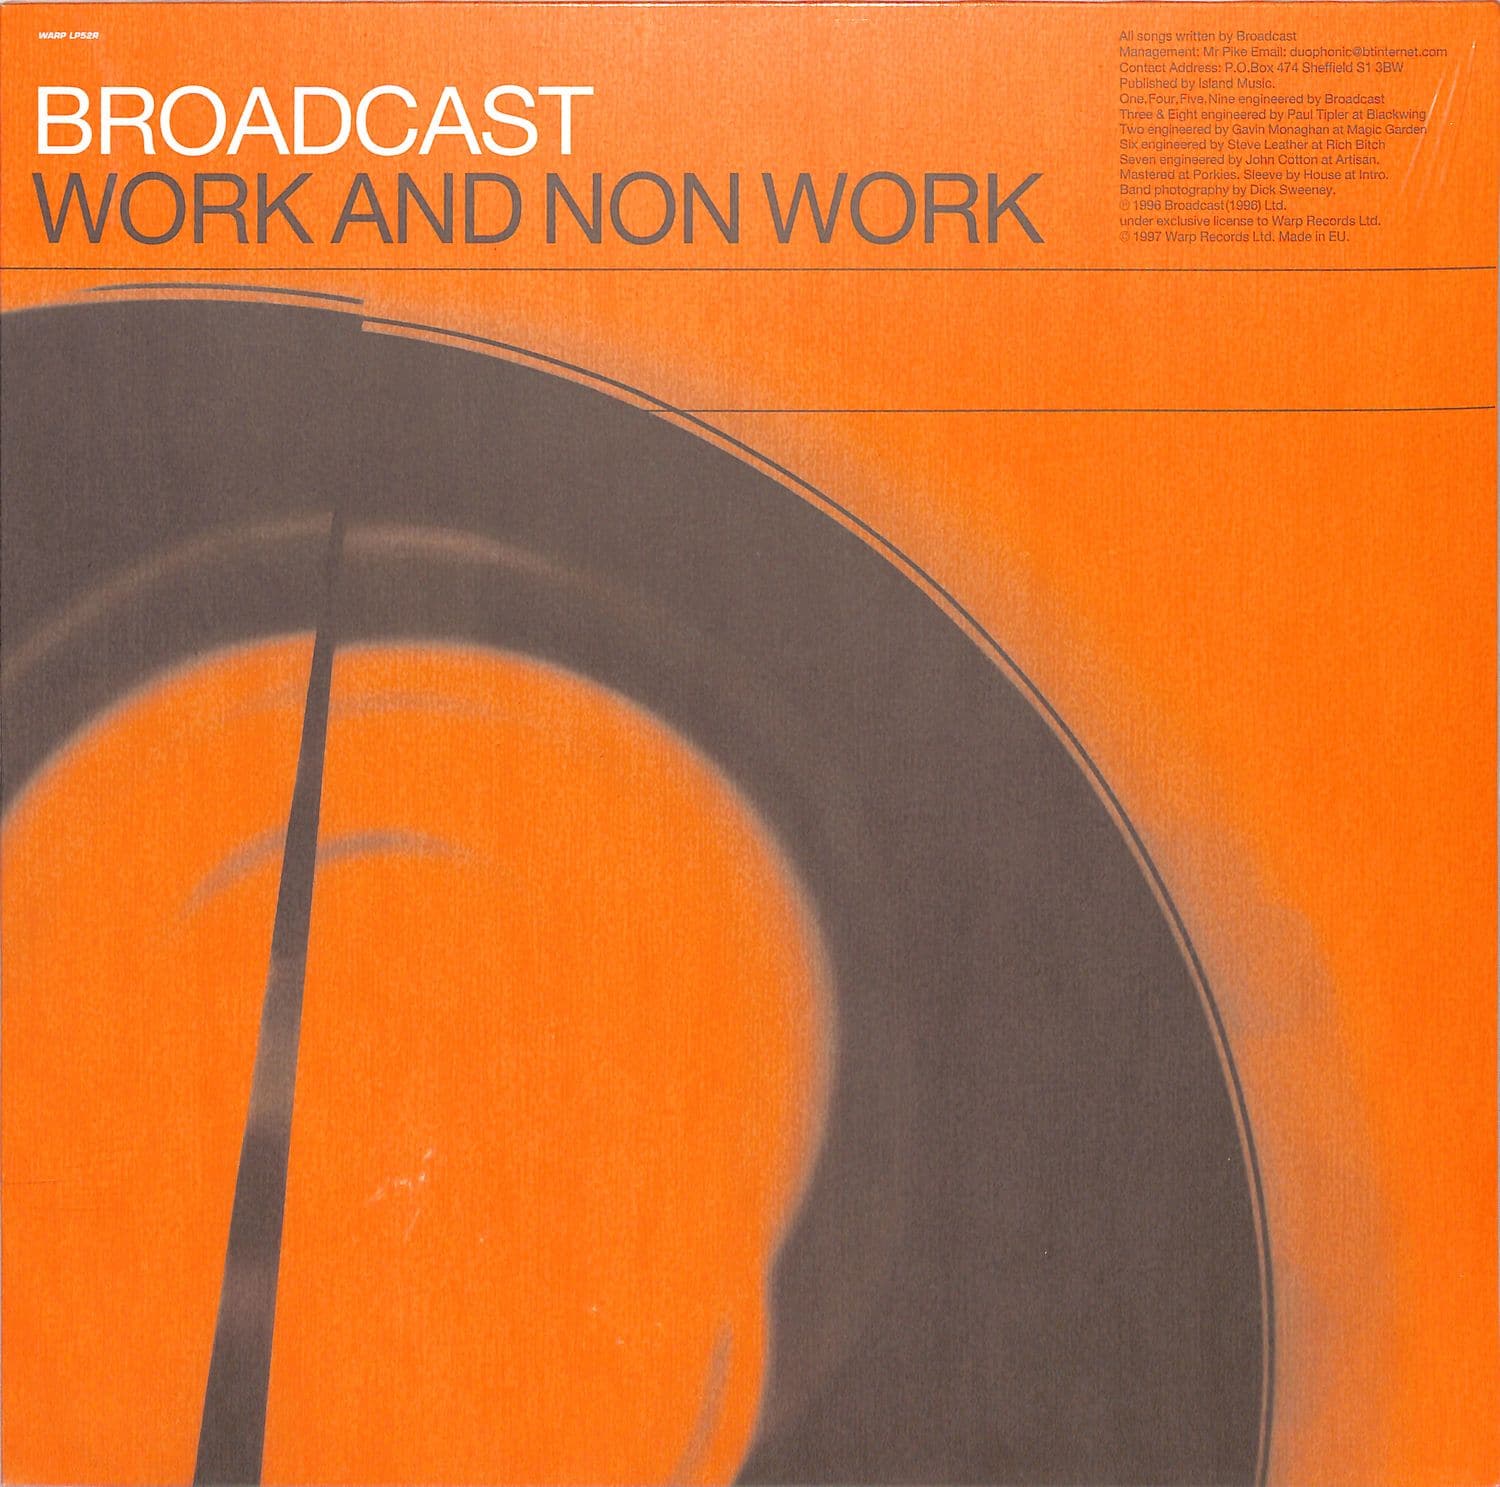 Broadcast - WORK AND NON WORK 